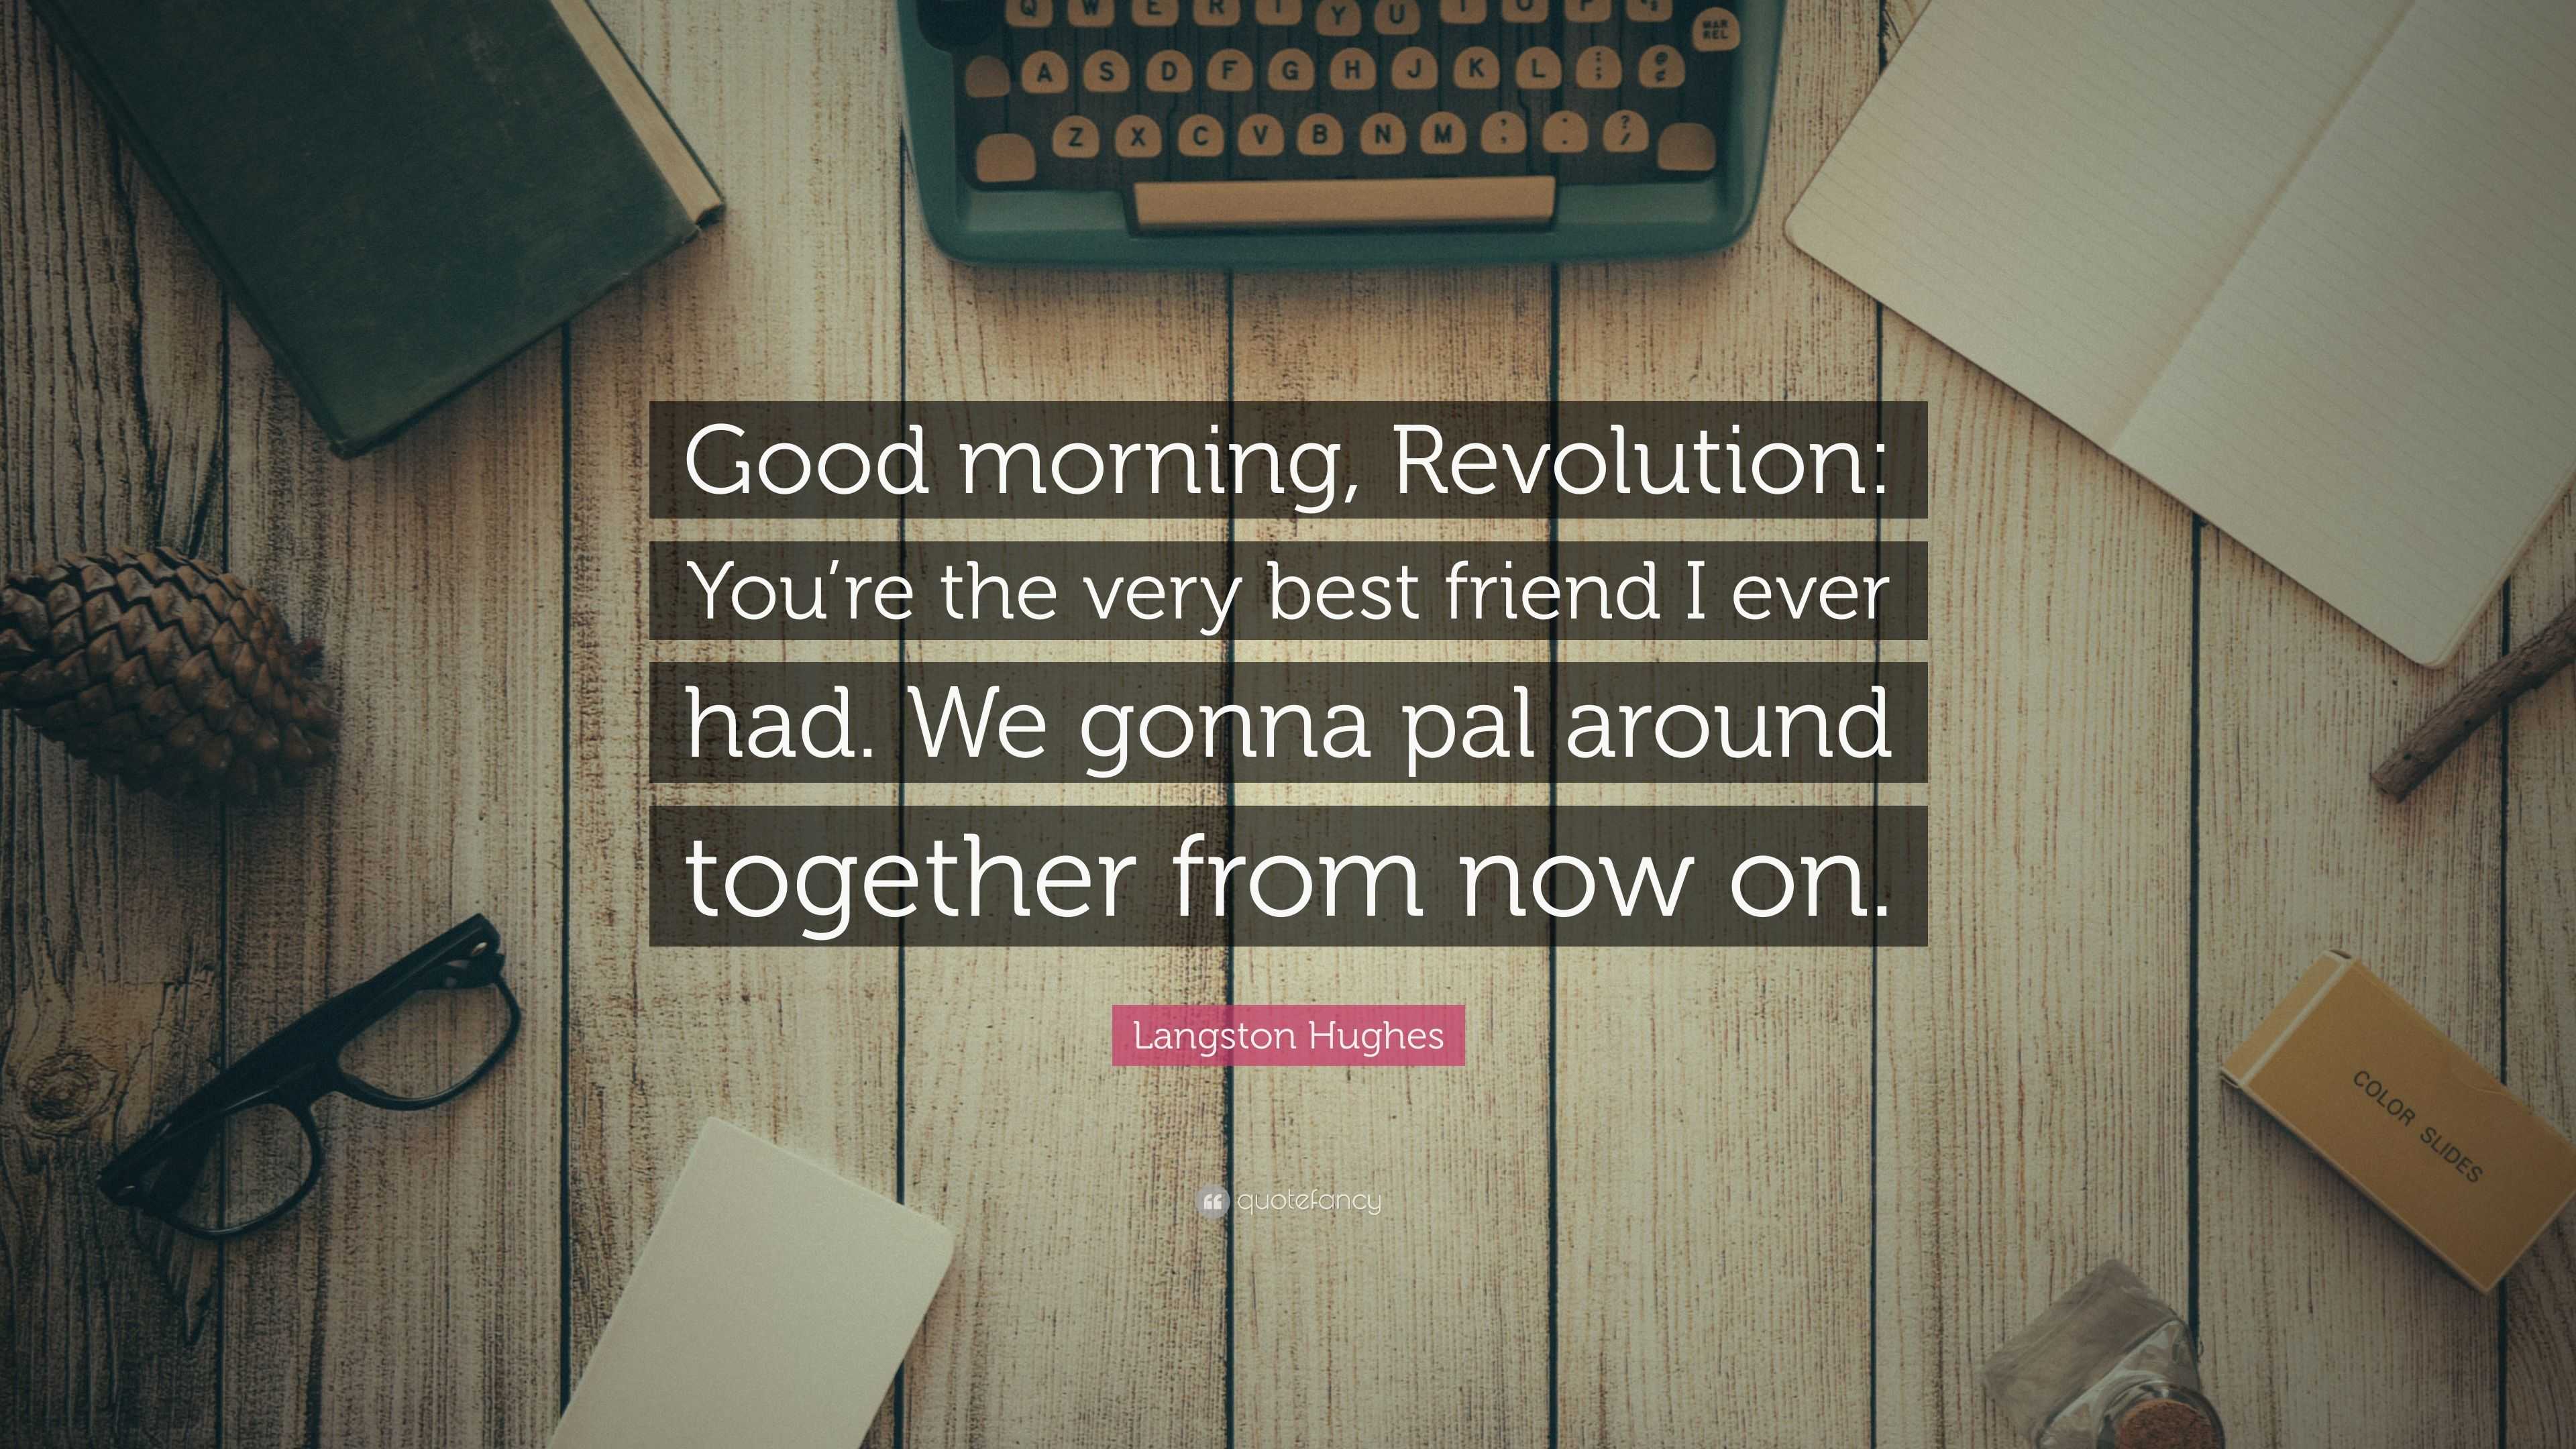 Good Morning, Revolution! United Front (what it is and isn't